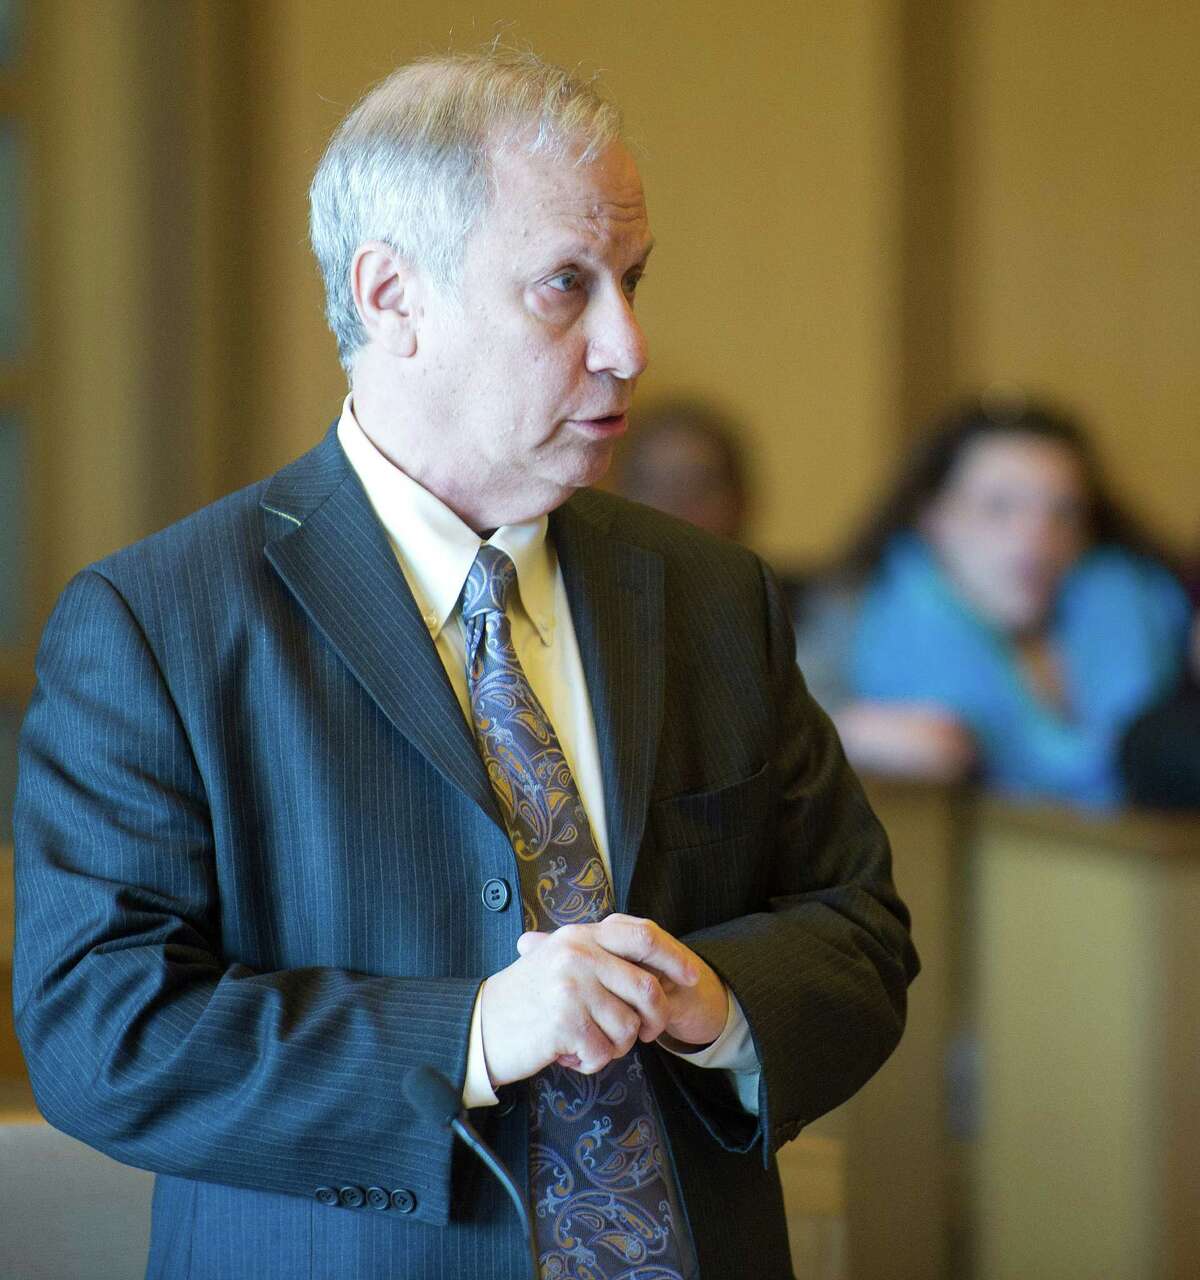 State's Attorney David Cohen speaks at State Superior Court in Stamford, Conn., where Stamford High School Principal Donna Valentine and Assistant Principal Roth Nordin appeared on Tuesday, November 19, 2014.